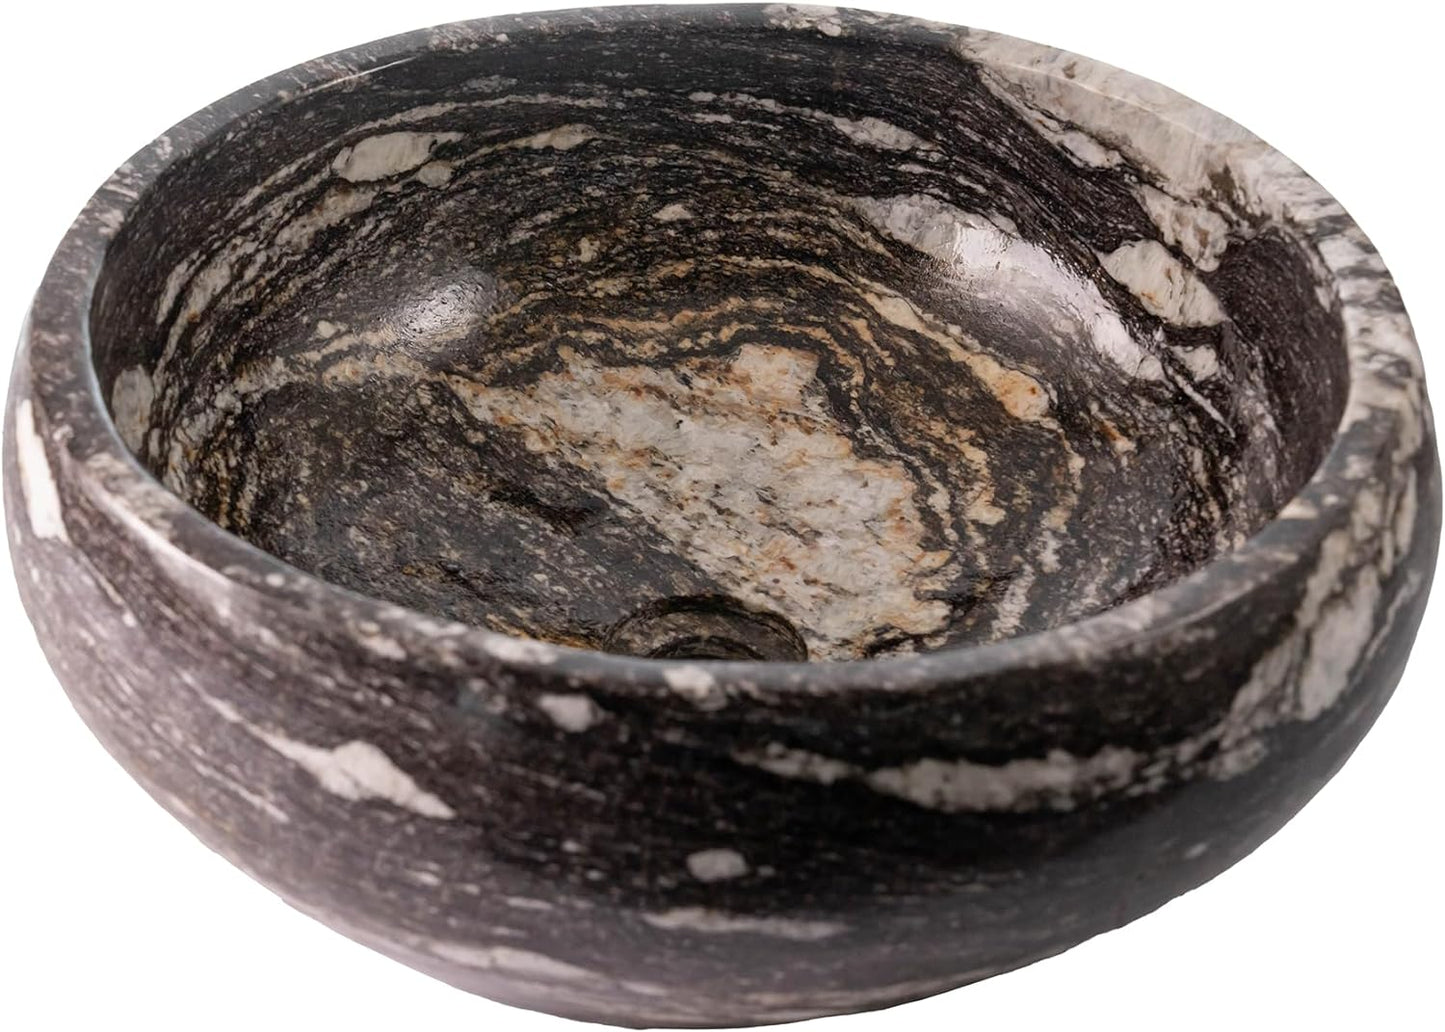 MIDUSO Natural River Stone Wash Basin, Round Stone Vessel Sink, Size D (13.8-17.7) x H (4.7-5.9), Stone Bathroom Sink Countertop and Pop-up Drain, H